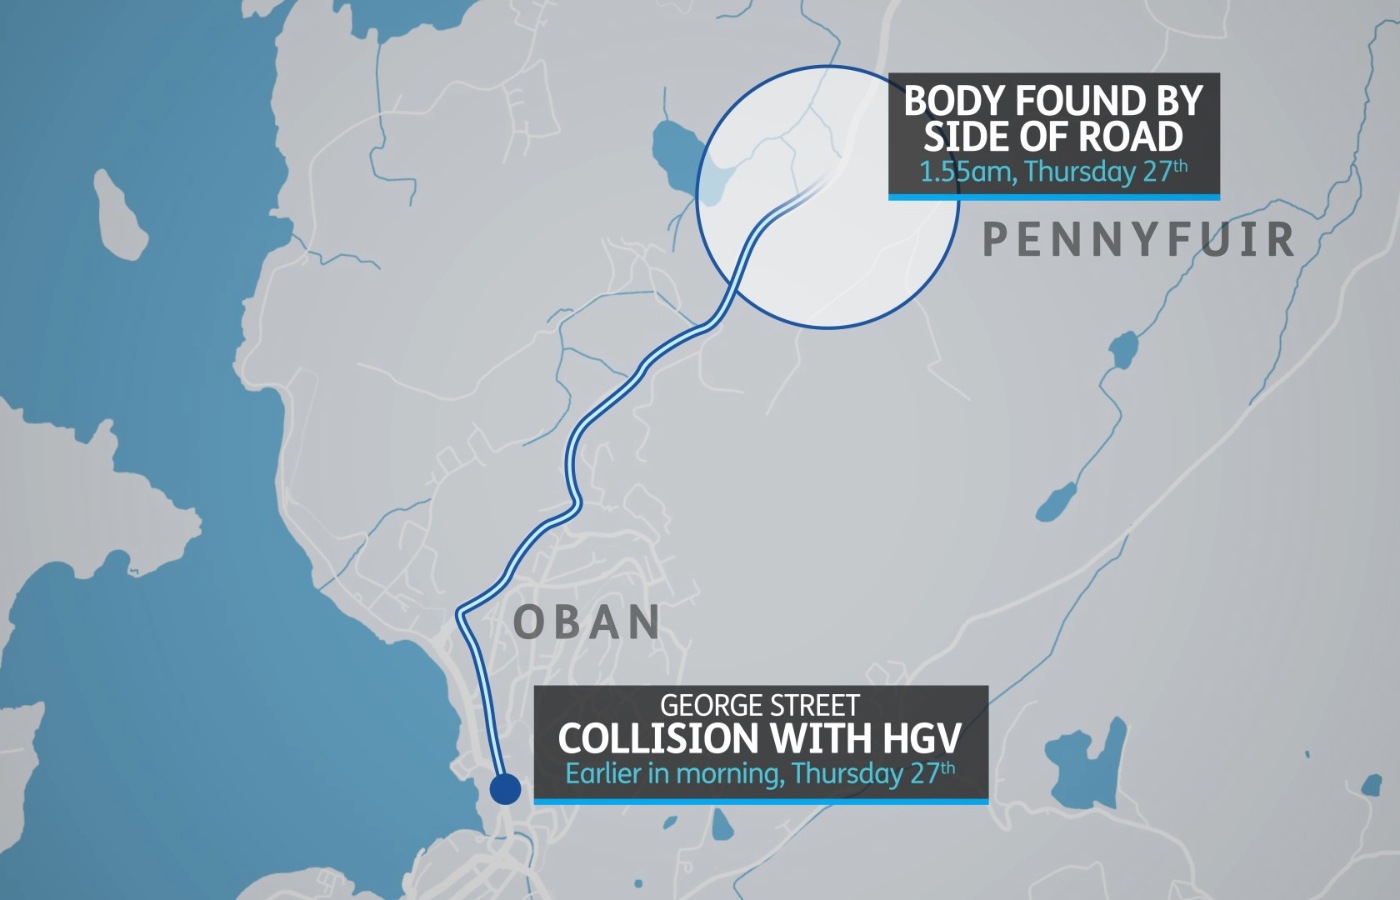 The man had hit by a HGV in the George Street area of Oban a short time before - around a mile away downhill.